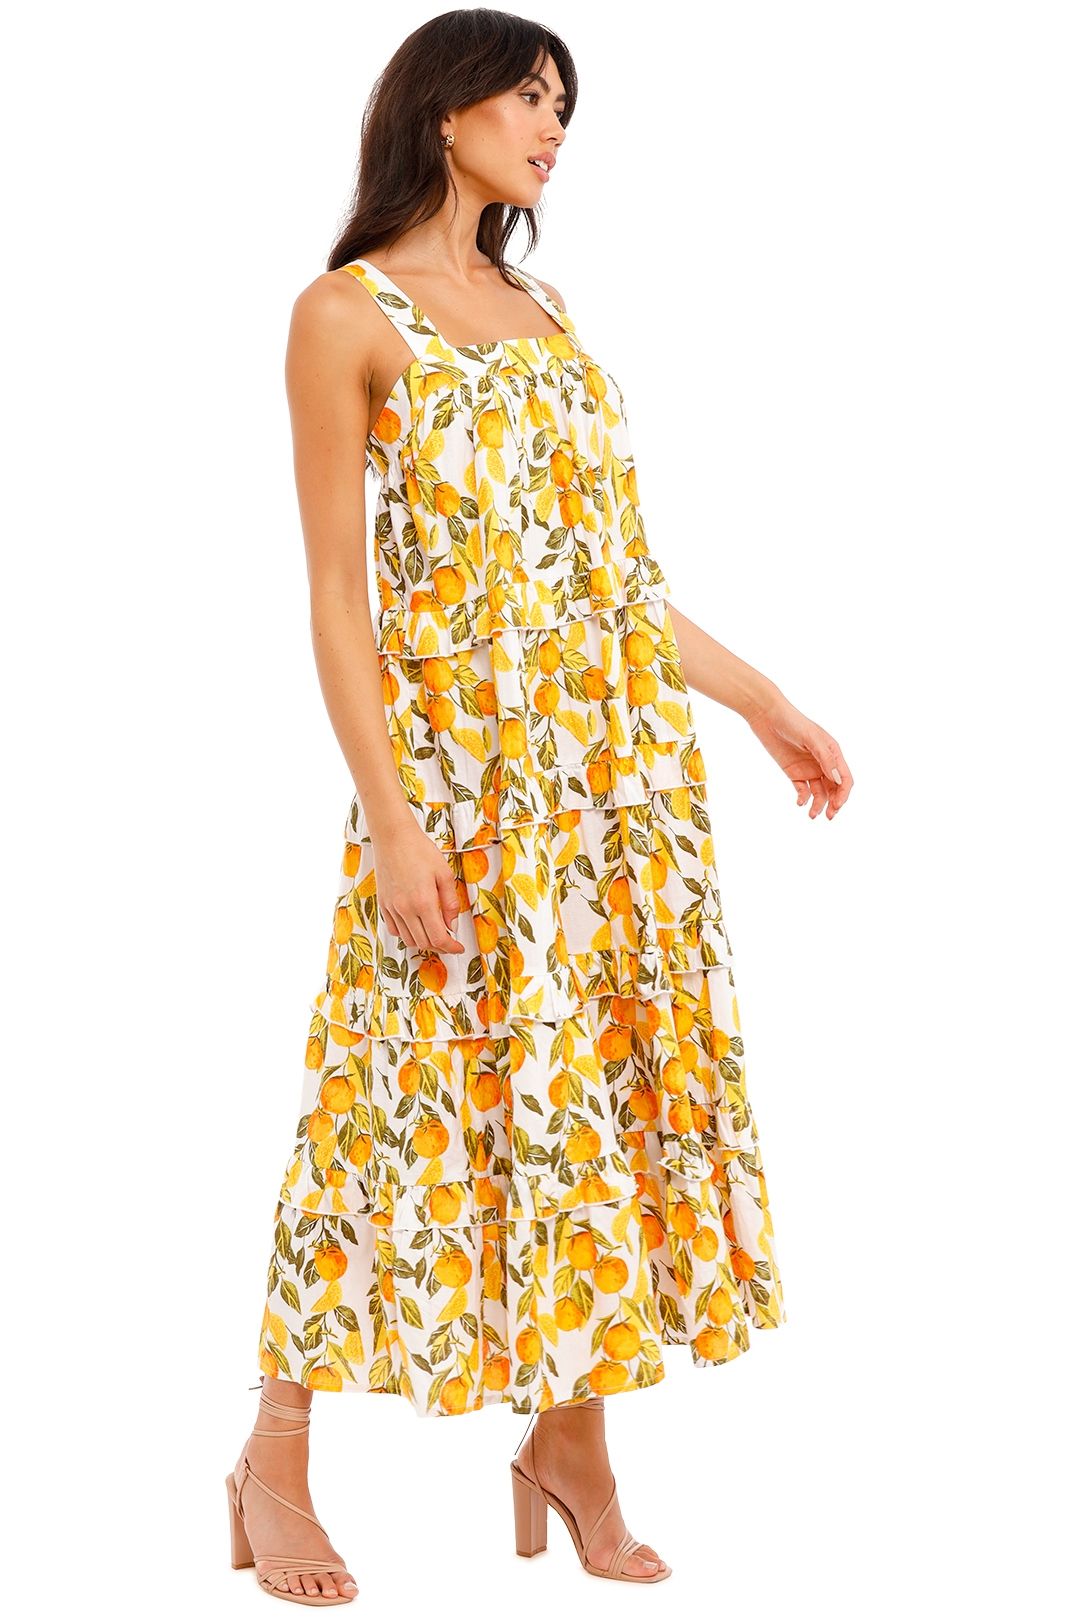 Never Fully Dressed Orange Grove Scallop Dress tiered